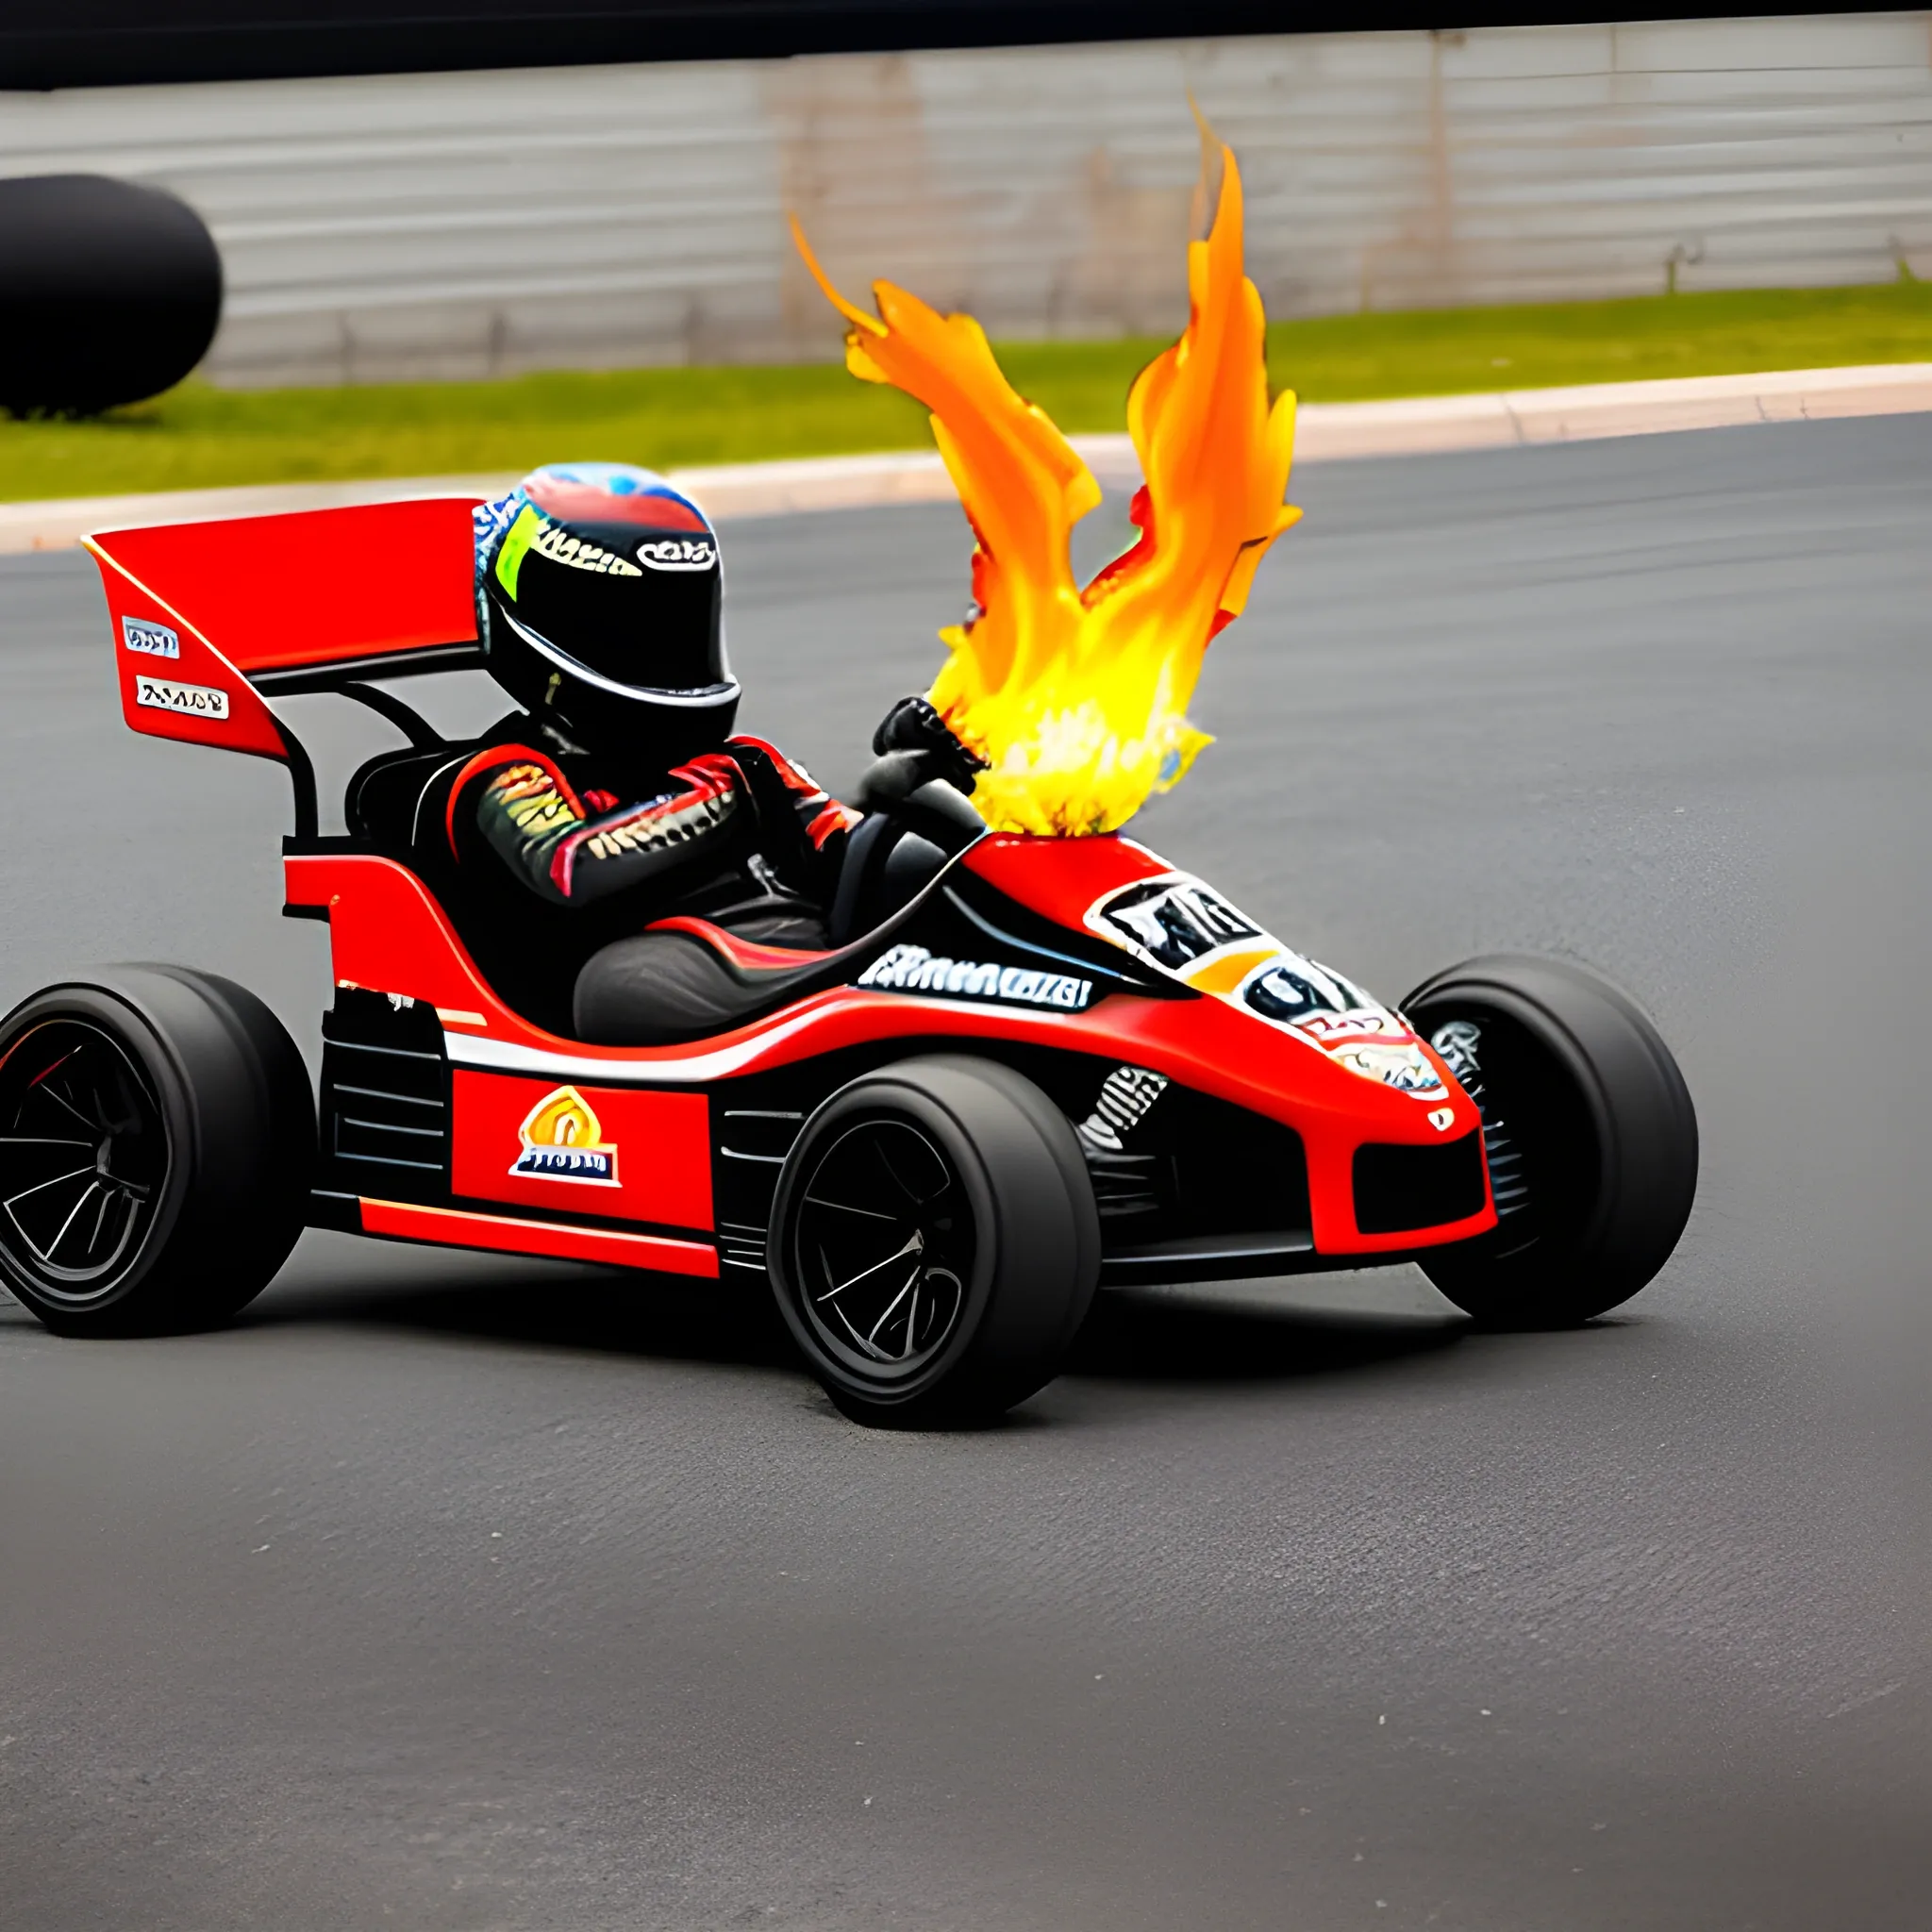 create a logo for a karting team, with a kart leaving a trail of fire on the list and the name "Karting Last Lap" printed on the logo